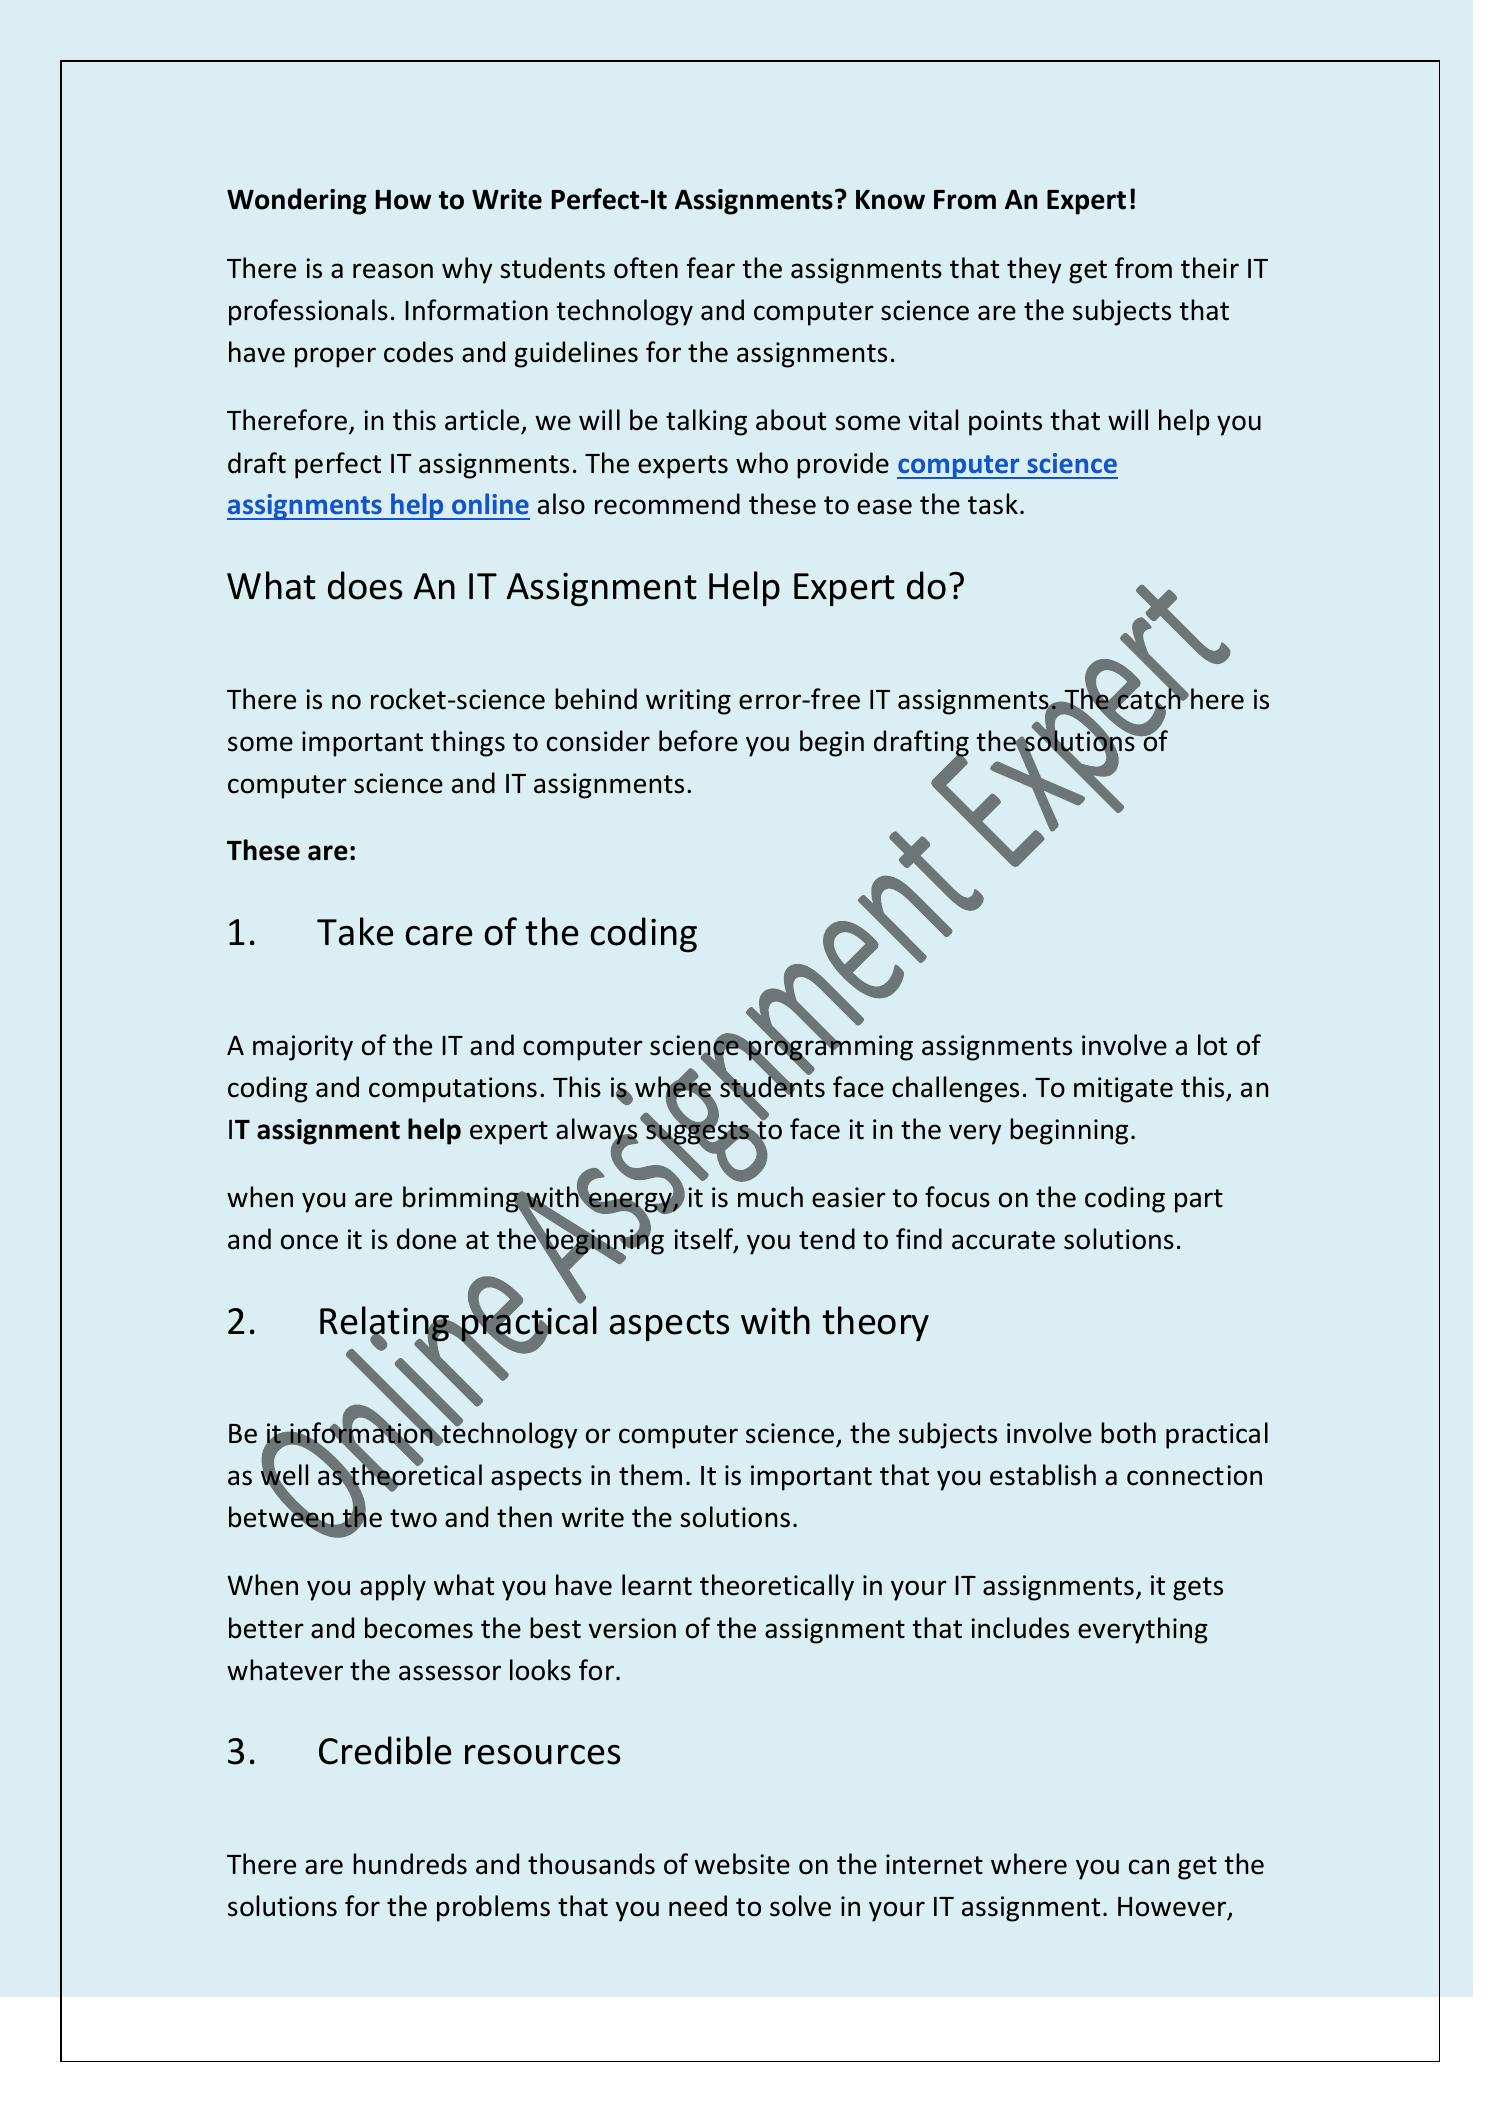 Write Perfect-It Assignments.pdf  DocDroid